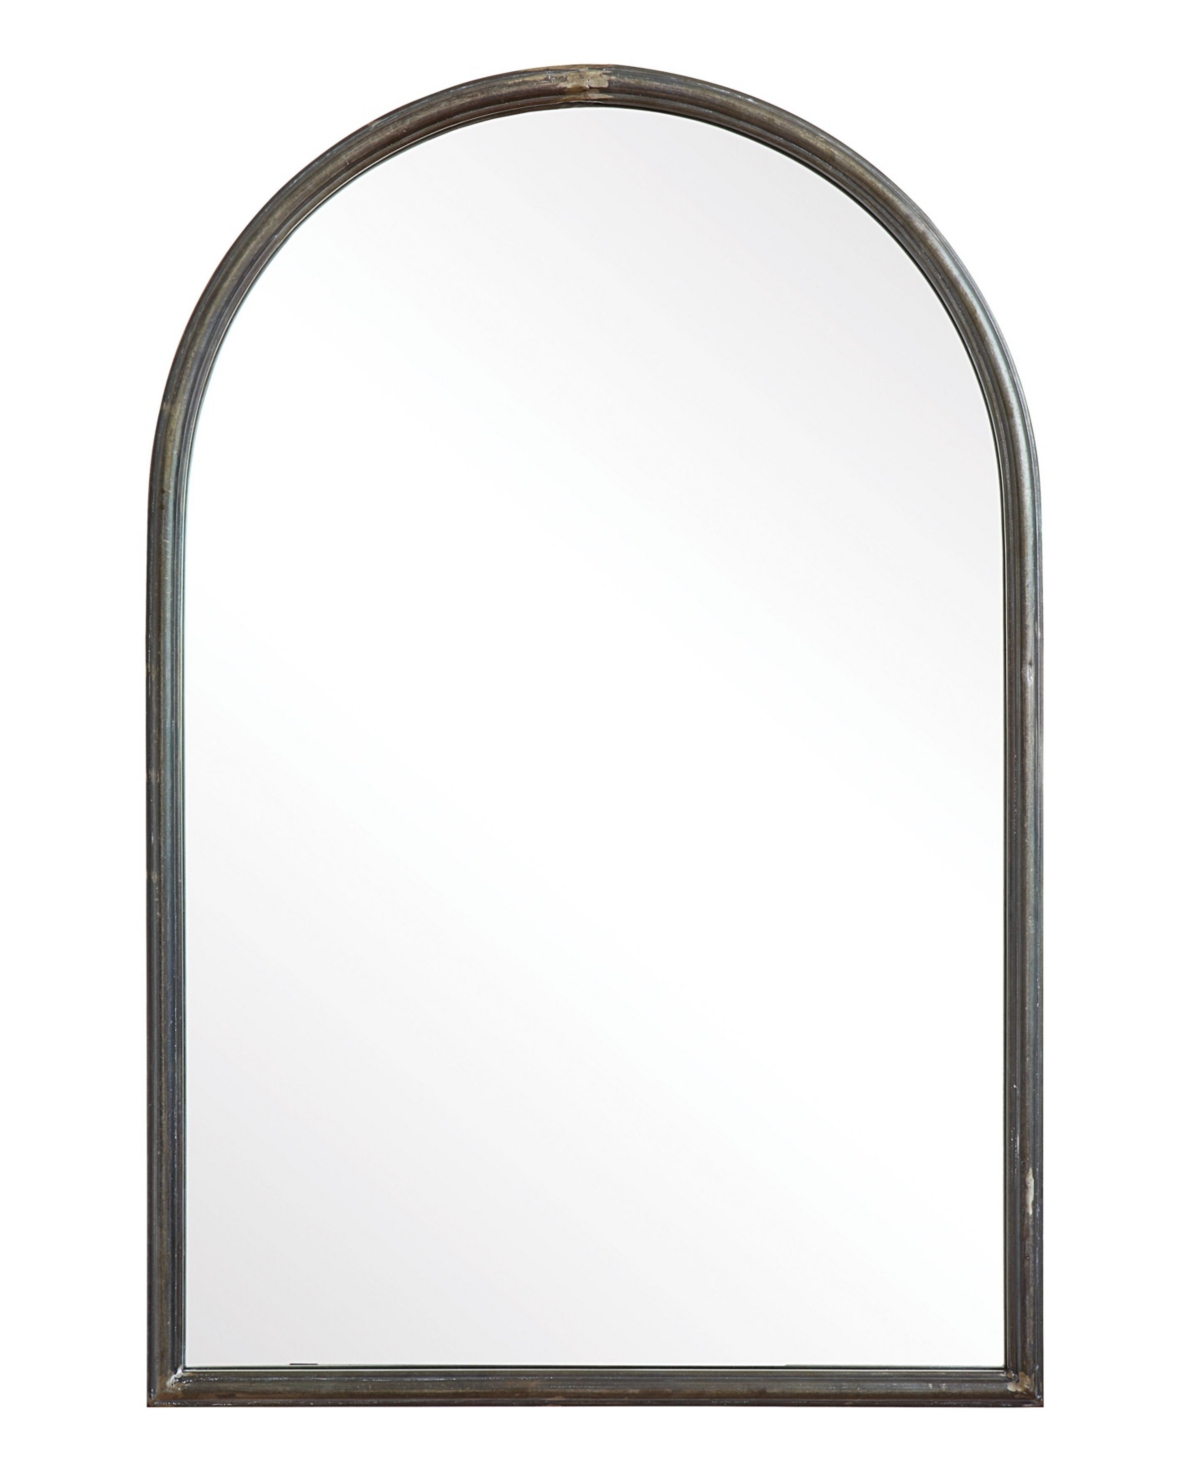 Arched Metal Framed Wall Mirror with Distressed Finish, Black - Grey